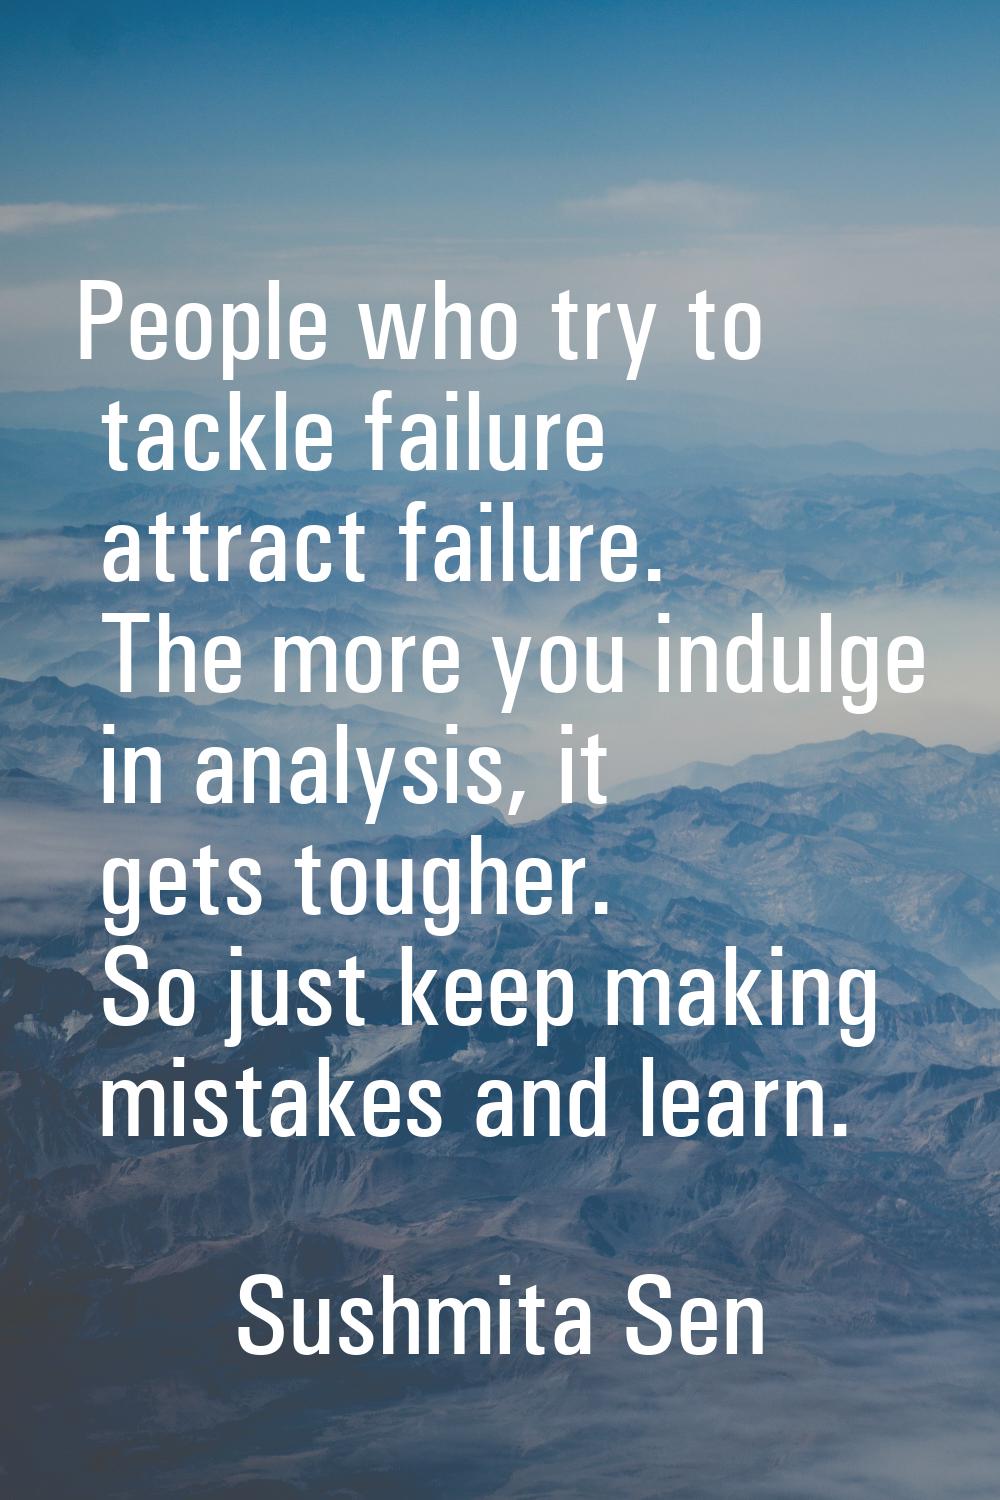 People who try to tackle failure attract failure. The more you indulge in analysis, it gets tougher